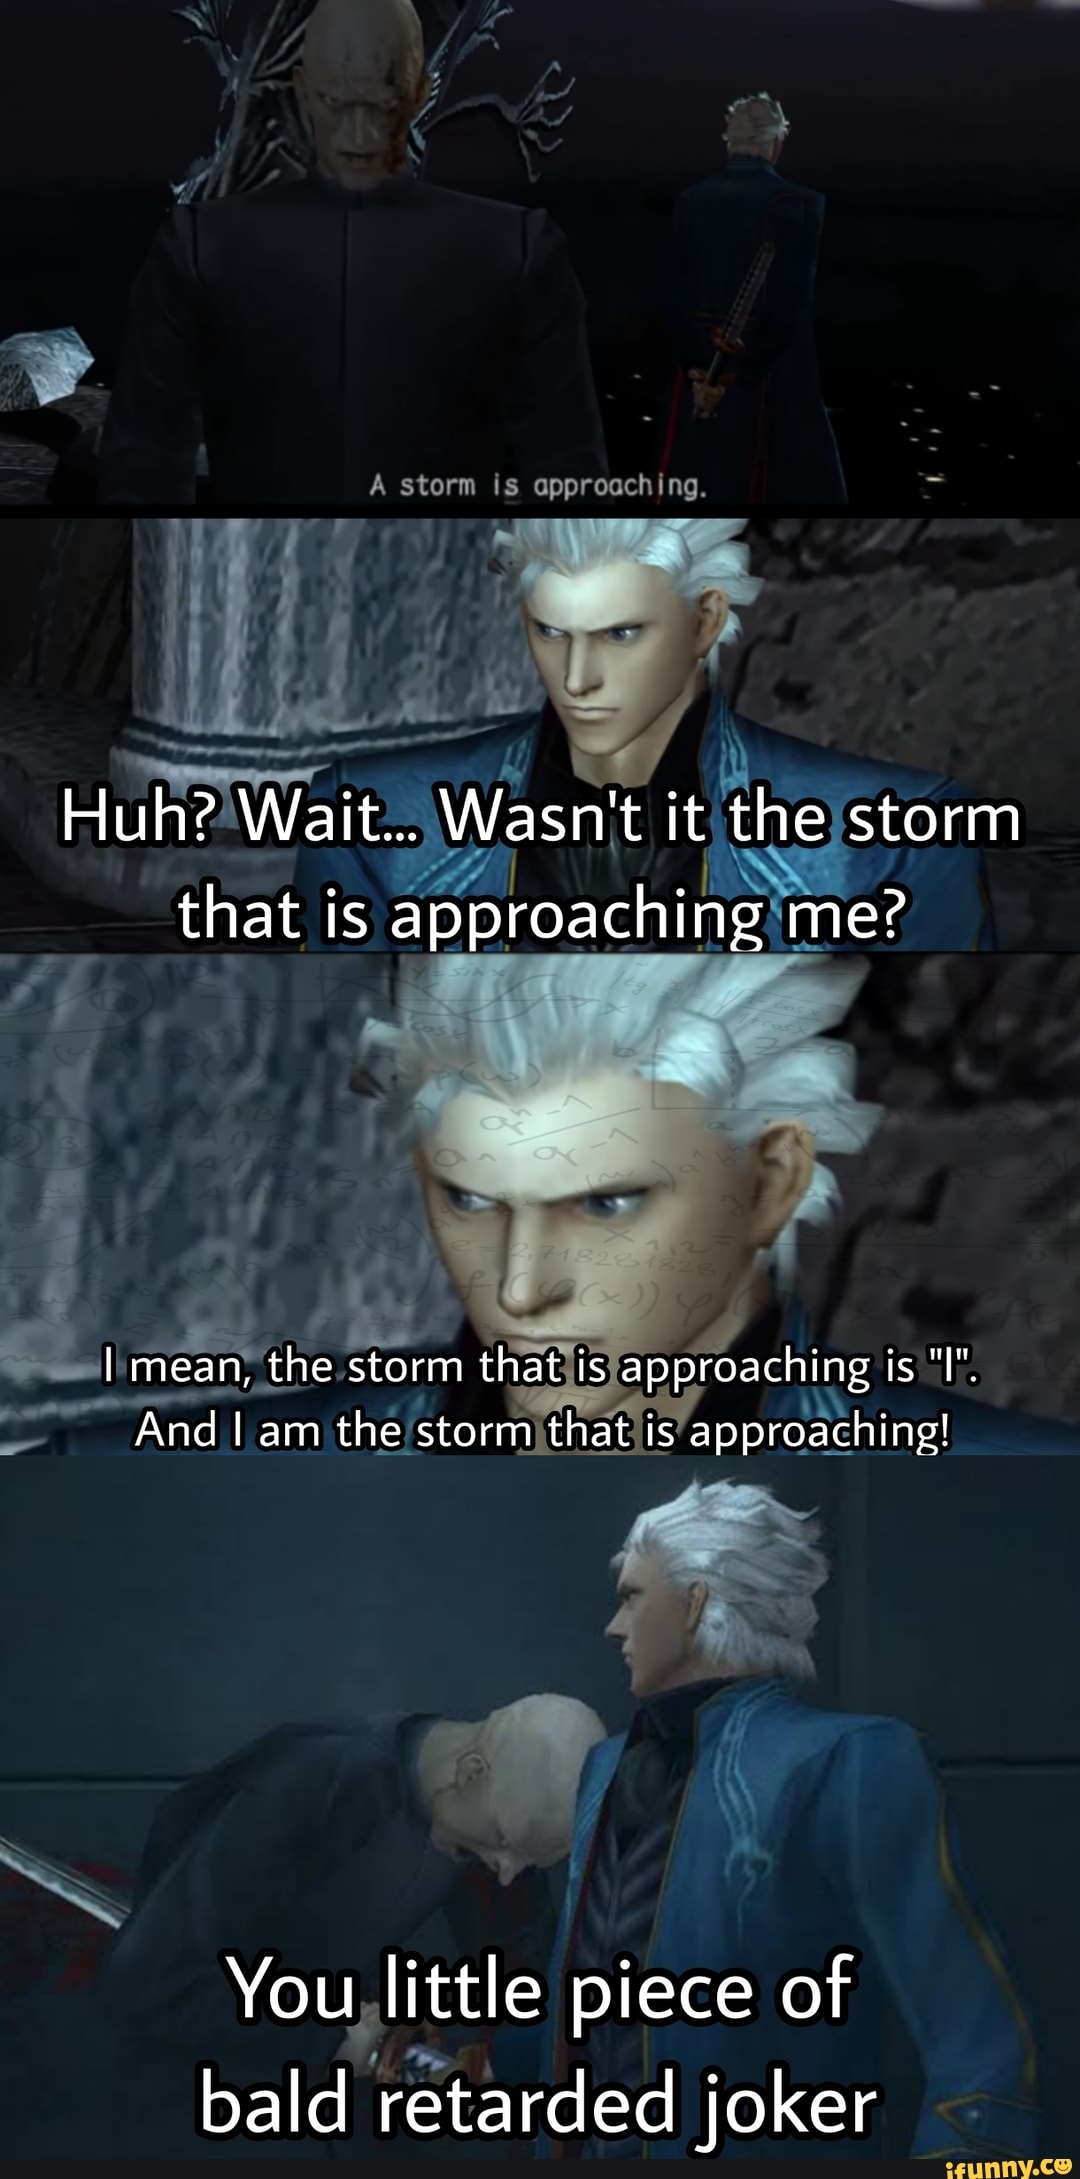 I am a storm that is approaching ed boy. - 9GAG